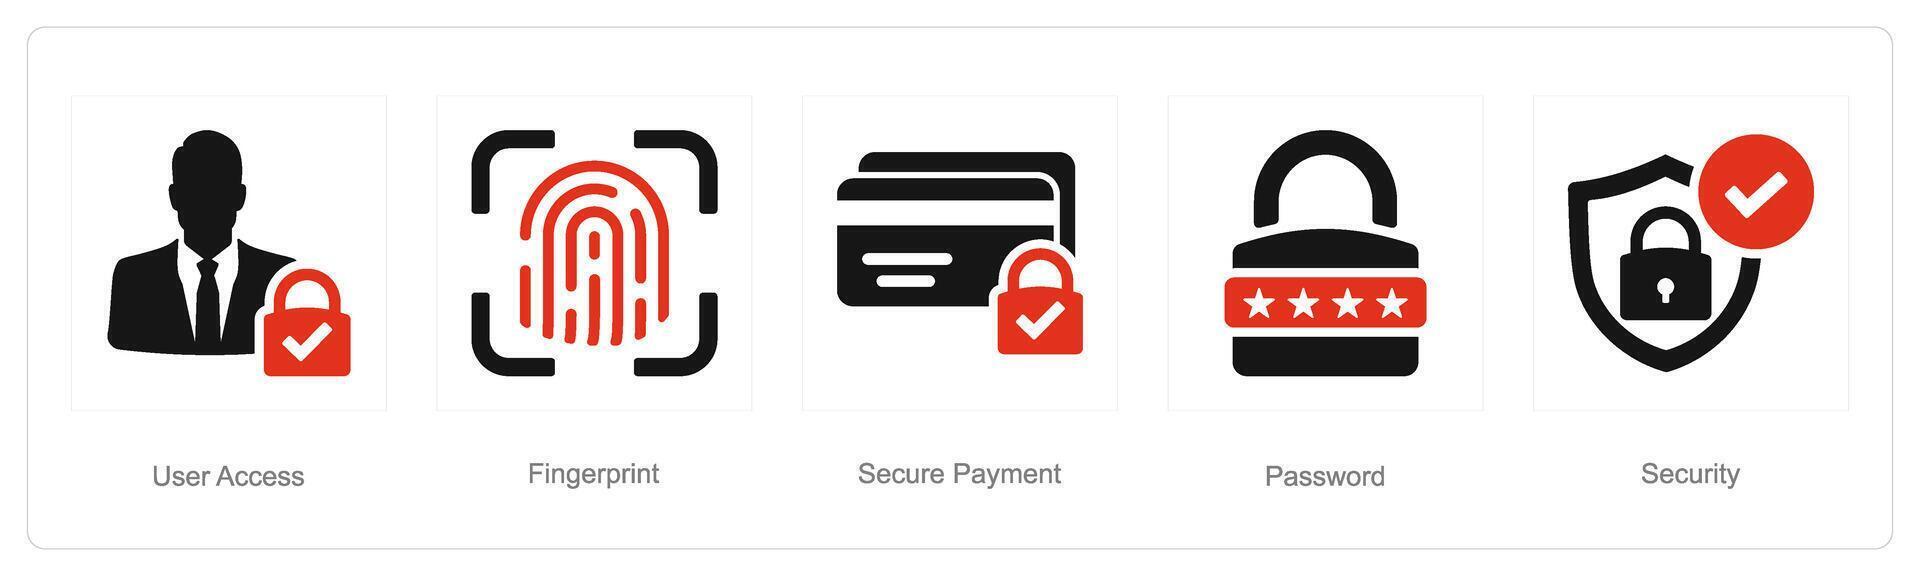 A set of 5 Cyber Security icons as user access, fingerprint, secure payment vector